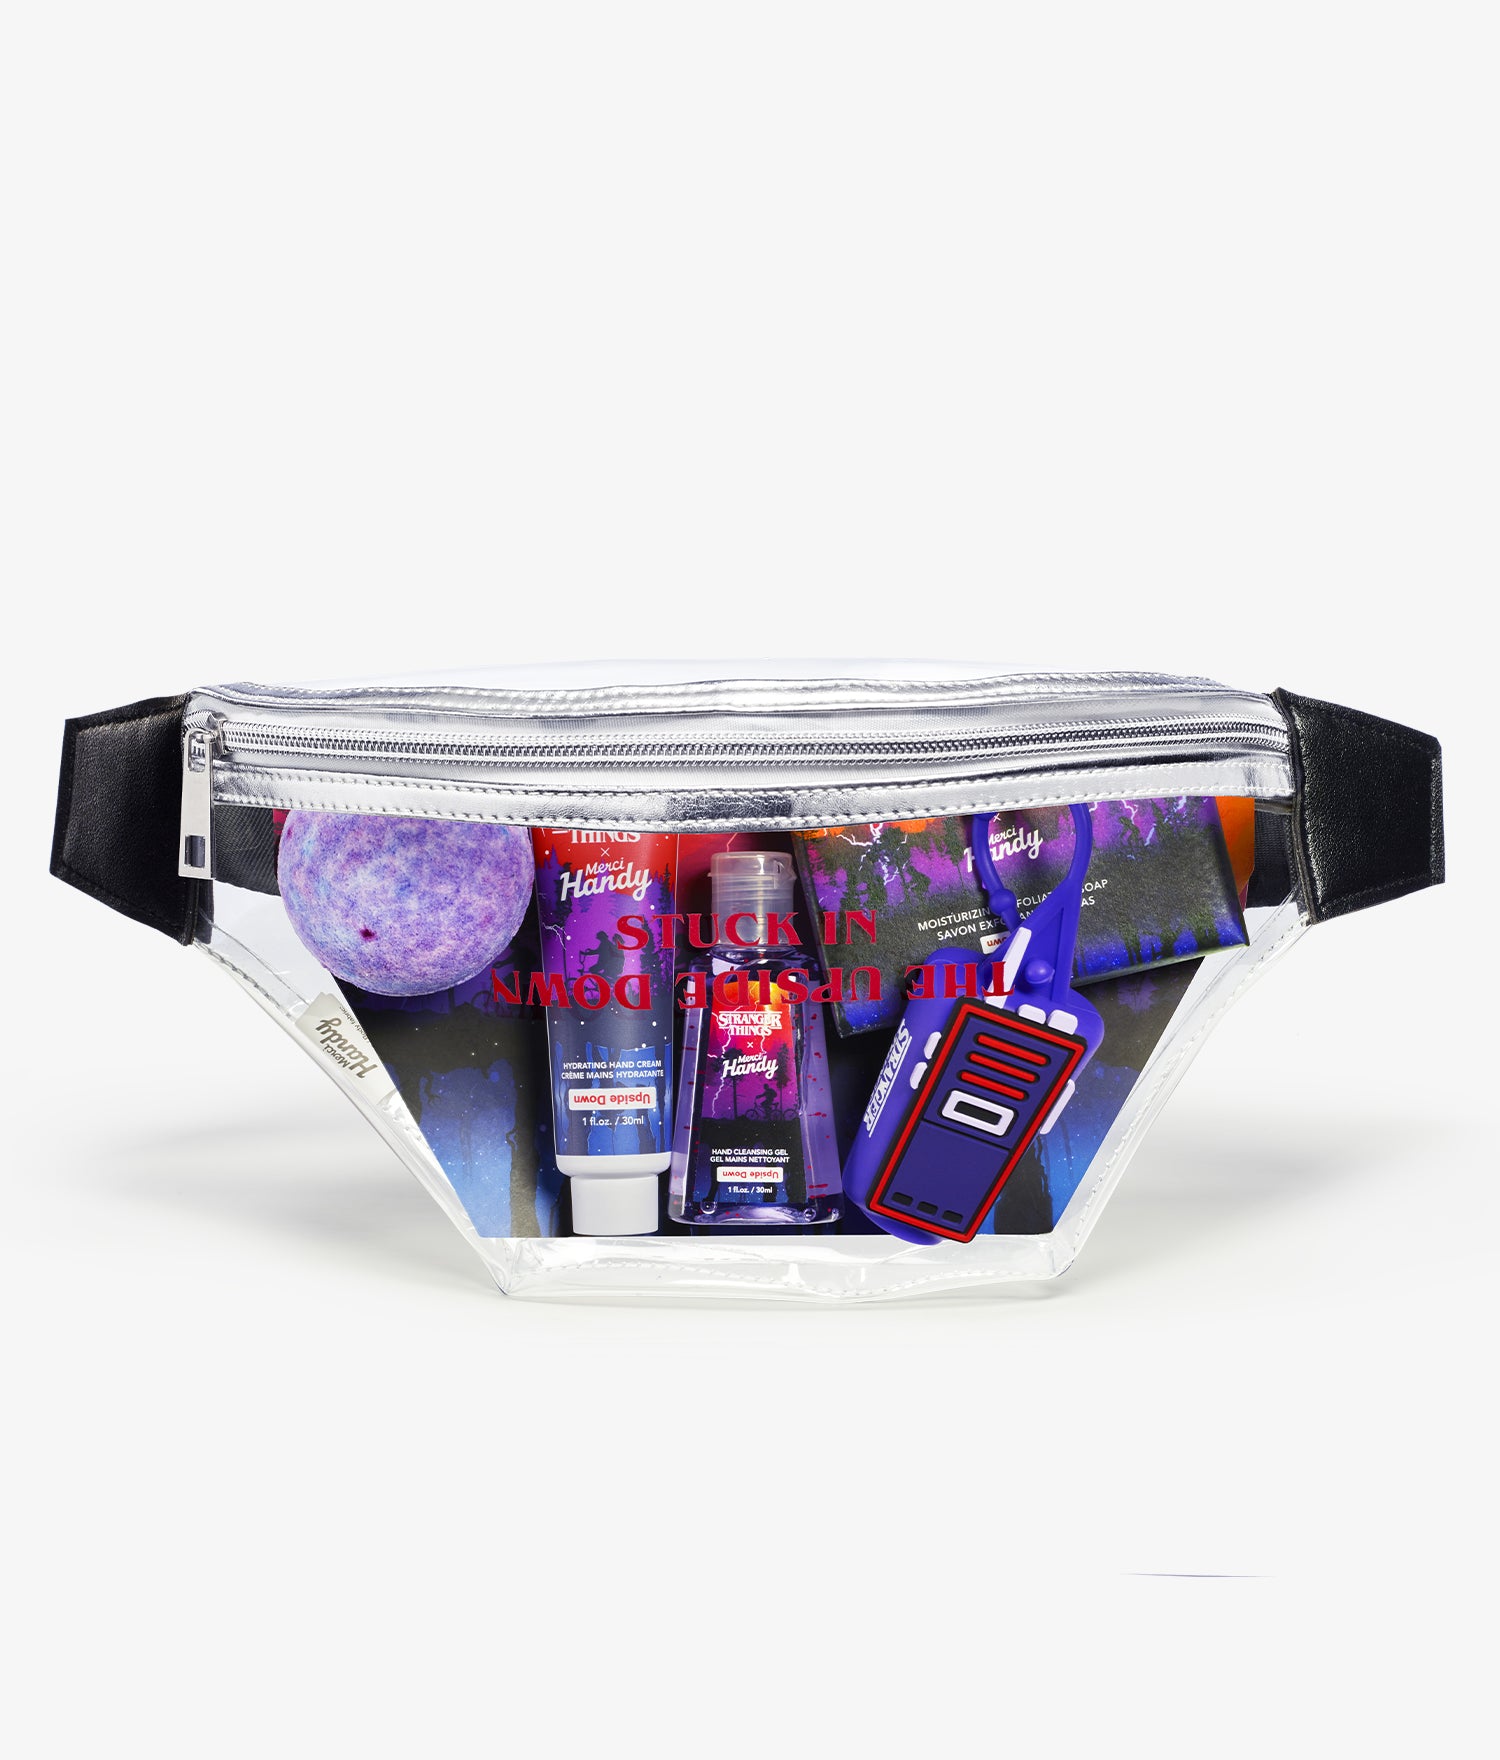 Upside Down Collector Fanny Pack